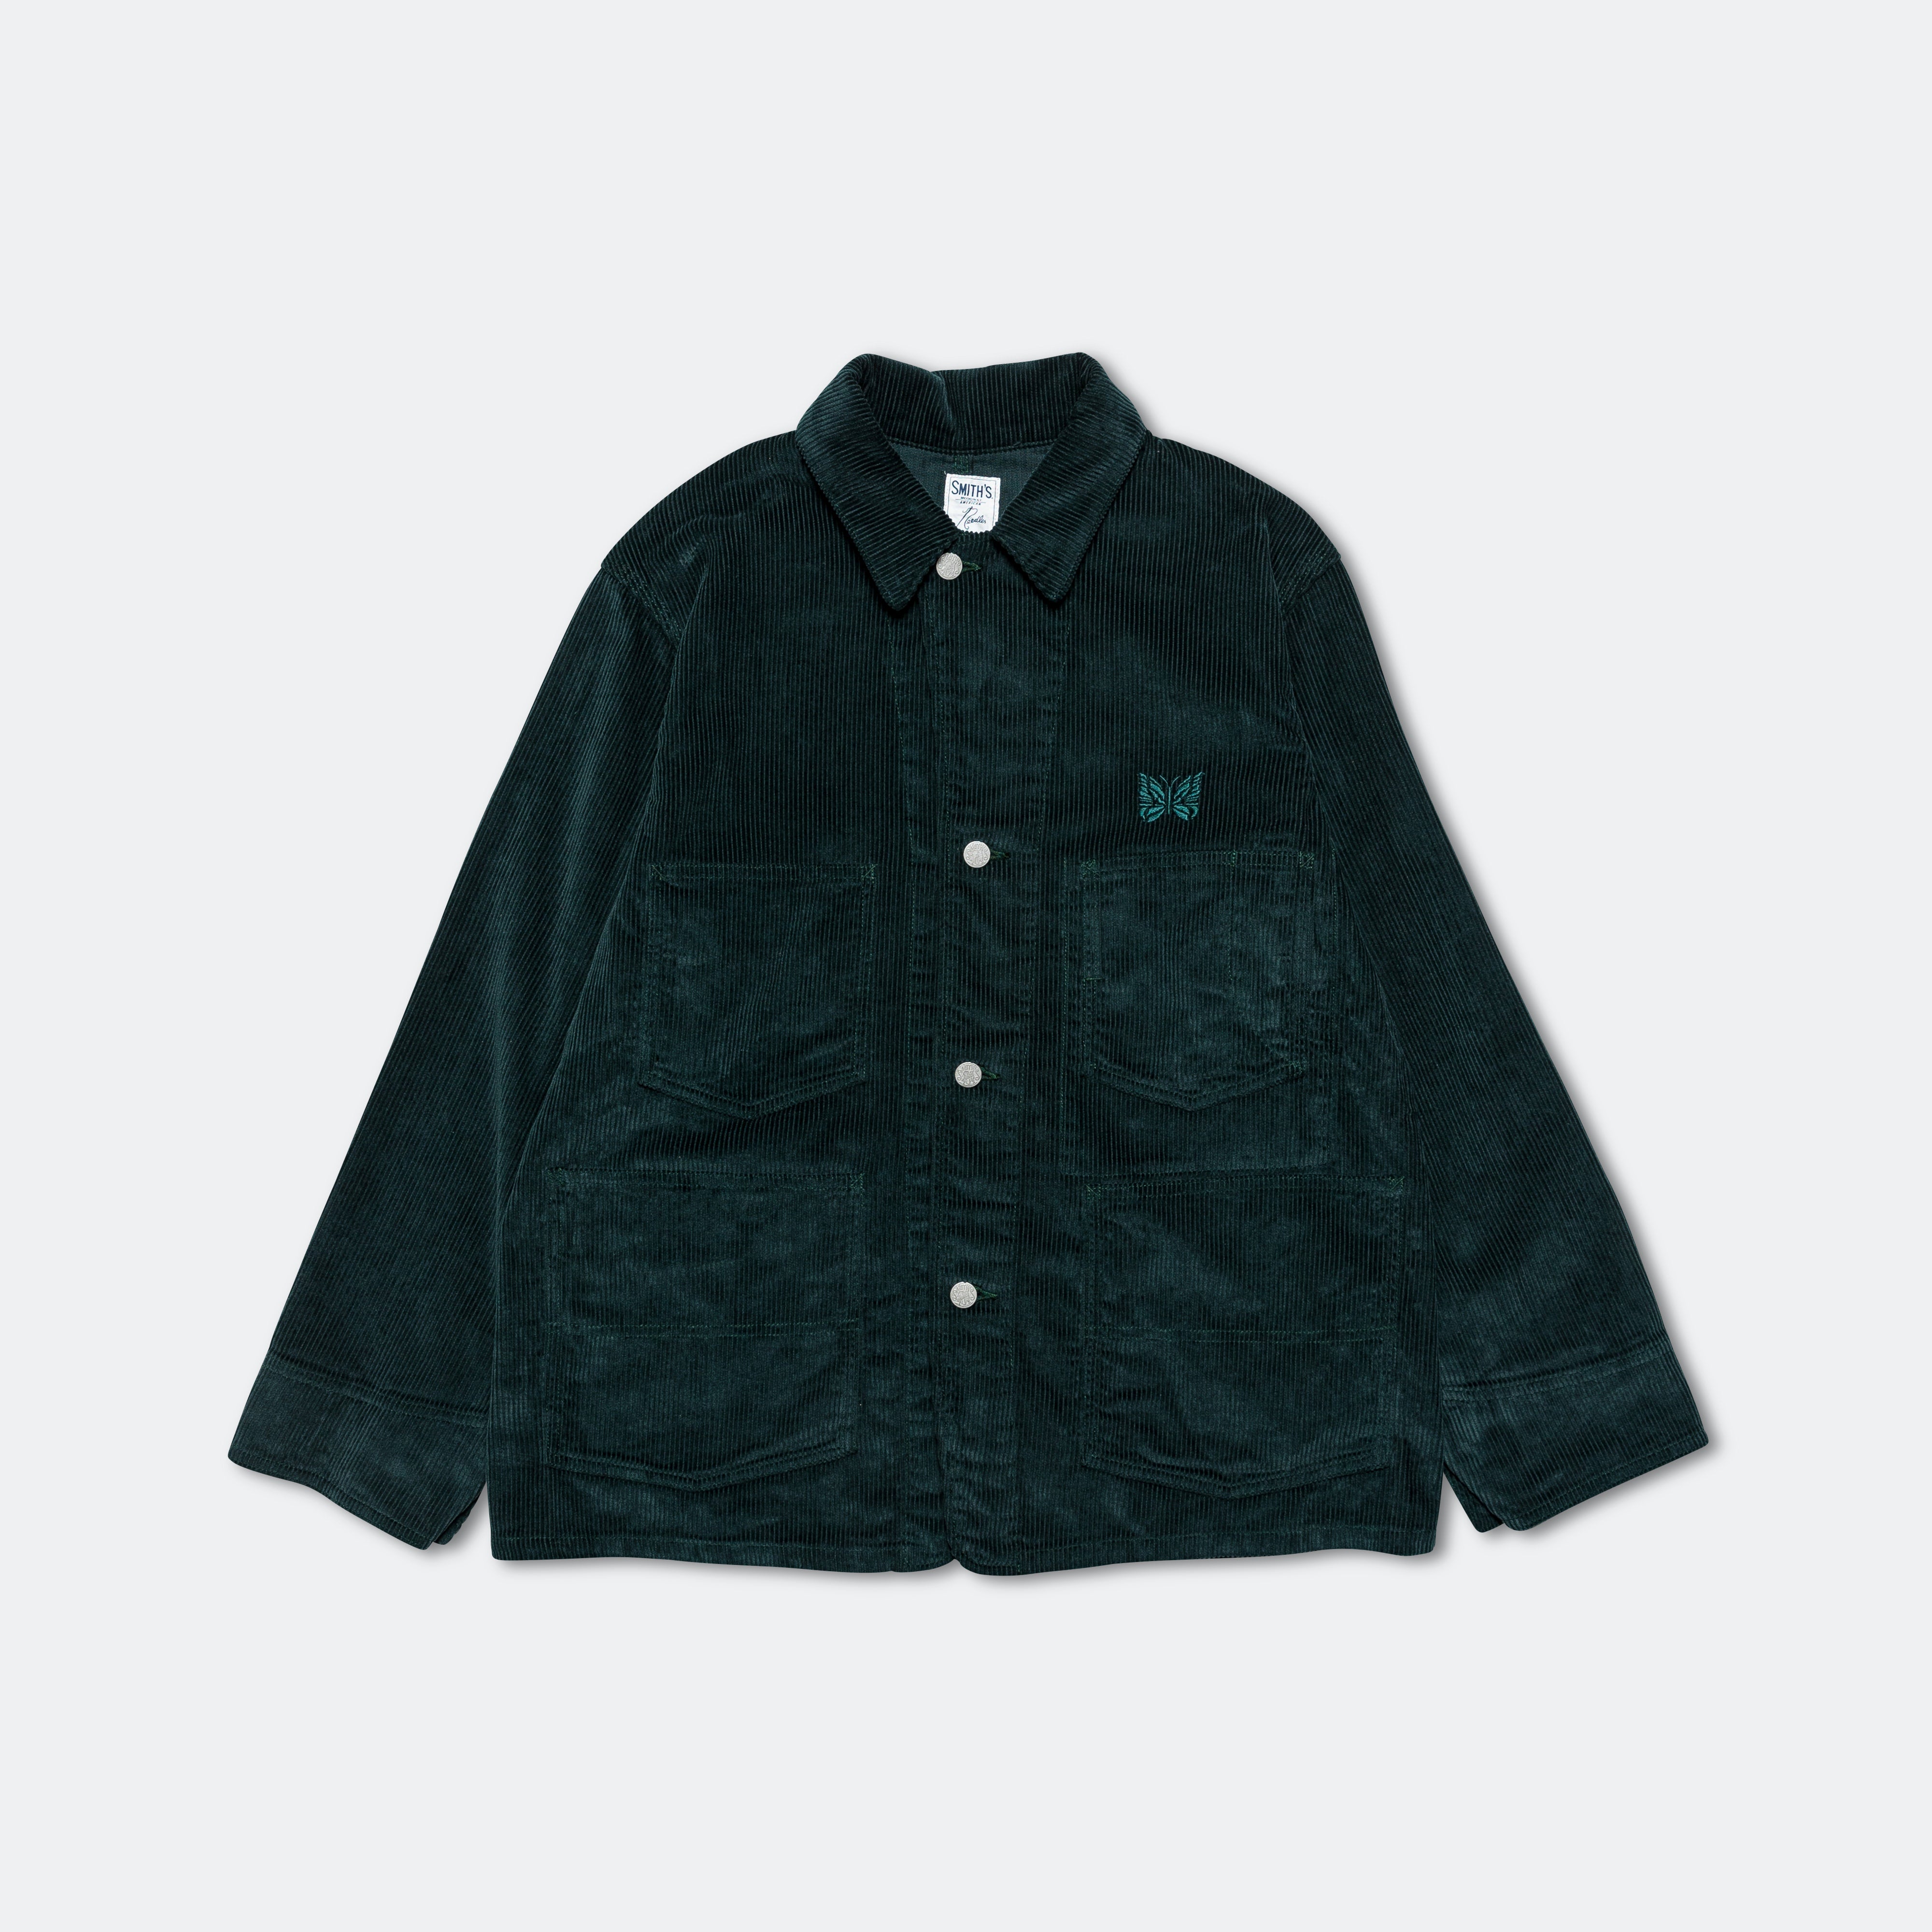 Coverall x SMITH's - Green 8W Corduroy